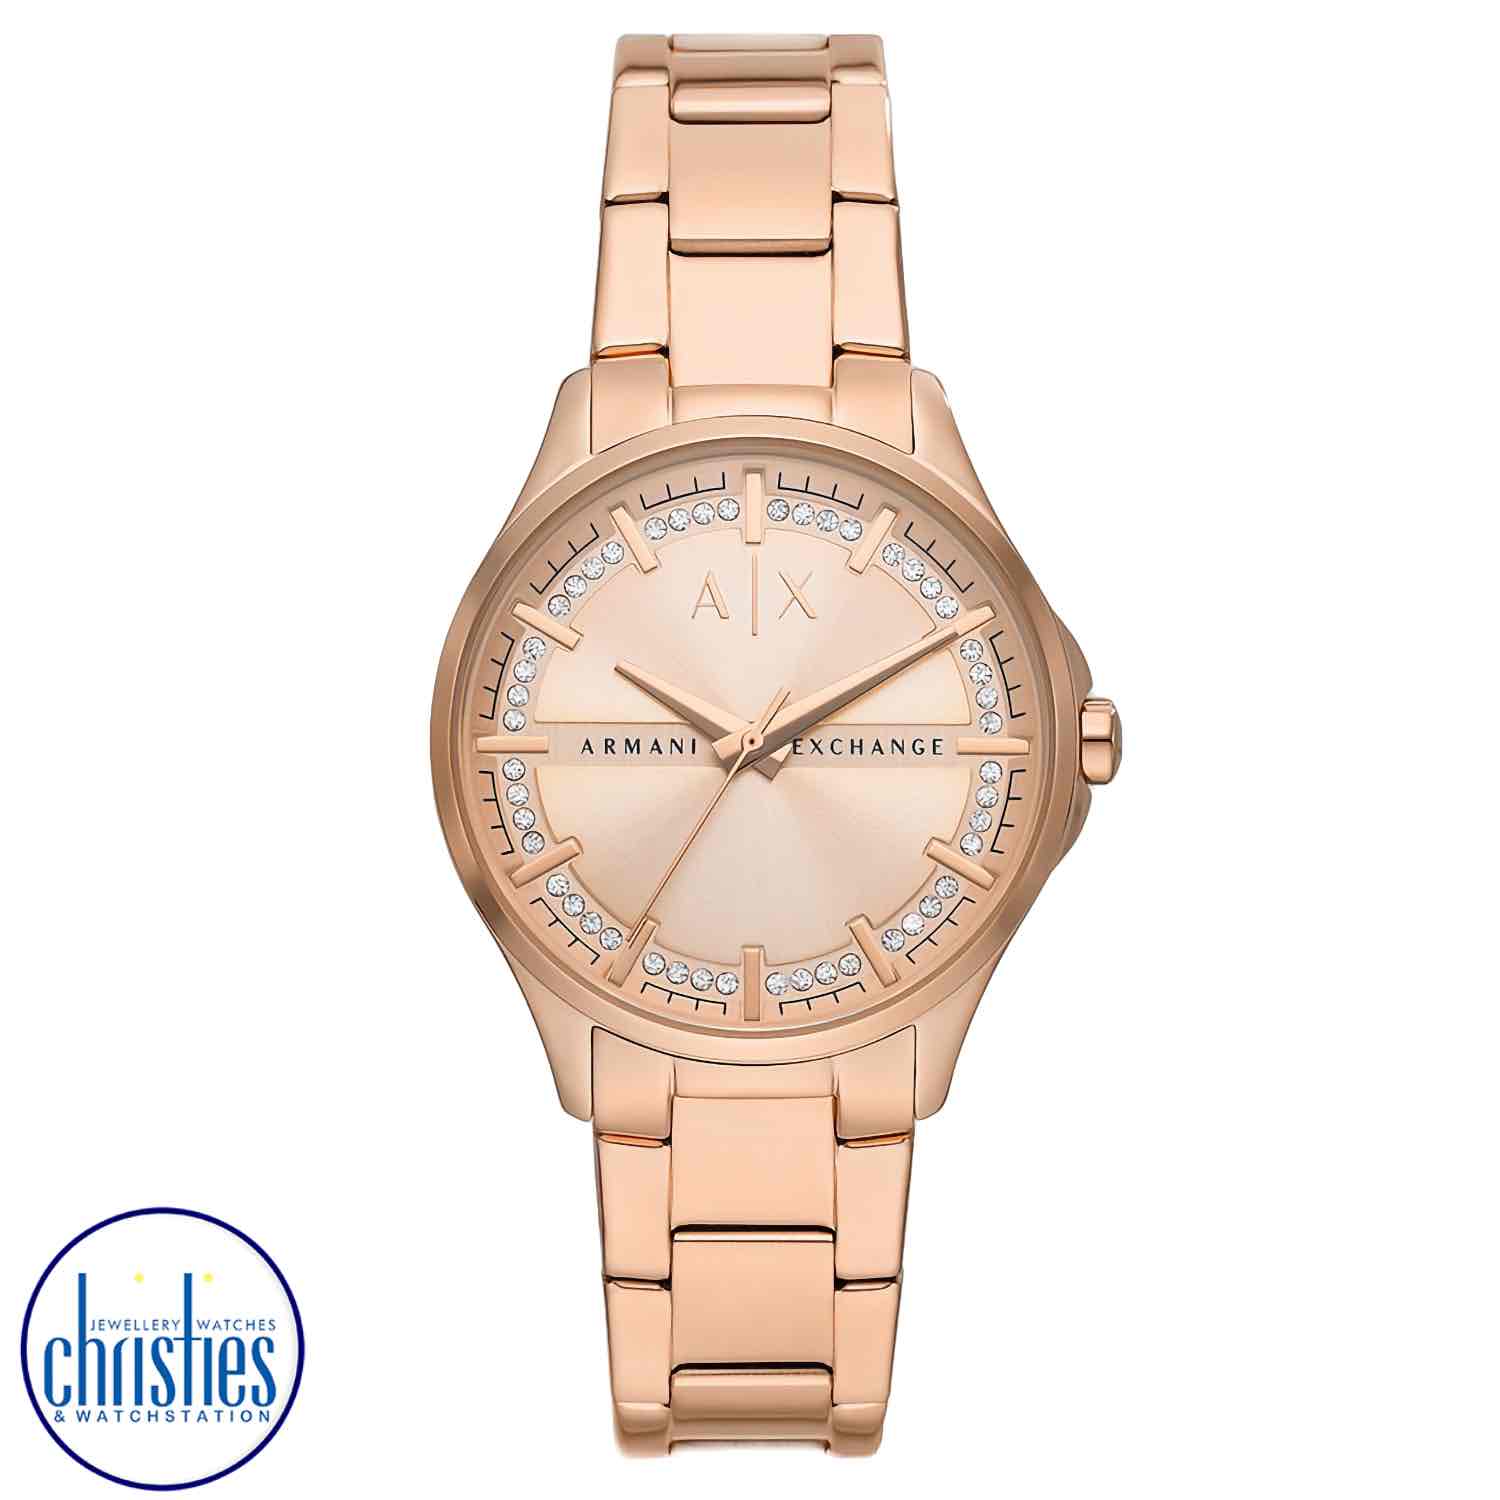 AX5264 A|X Armani Exchange LADY HAMPTON  Rose Gold-Tone Stainless Steel Watch. AX5264 A|X Armani Exchange LADY HAMPTON Rose Gold-Tone Stainless Steel WatchAfterpay - Split your purchase into 4 instalments - Pay for your purchase over 4 instalments, due ev